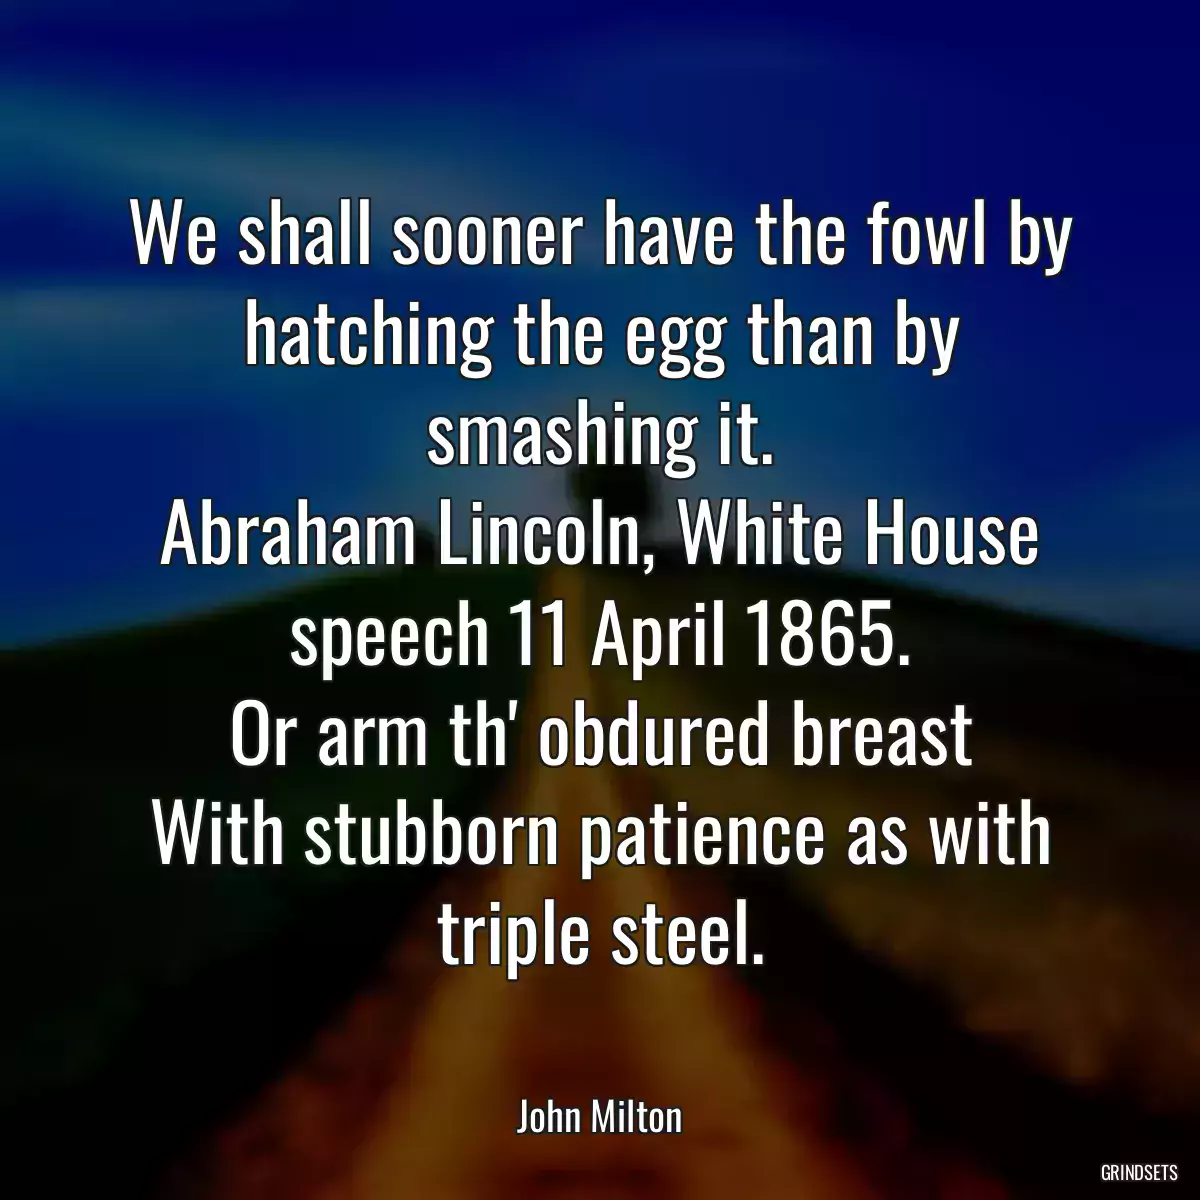 We shall sooner have the fowl by hatching the egg than by smashing it.
Abraham Lincoln, White House speech 11 April 1865.
Or arm th\' obdured breast
With stubborn patience as with triple steel.